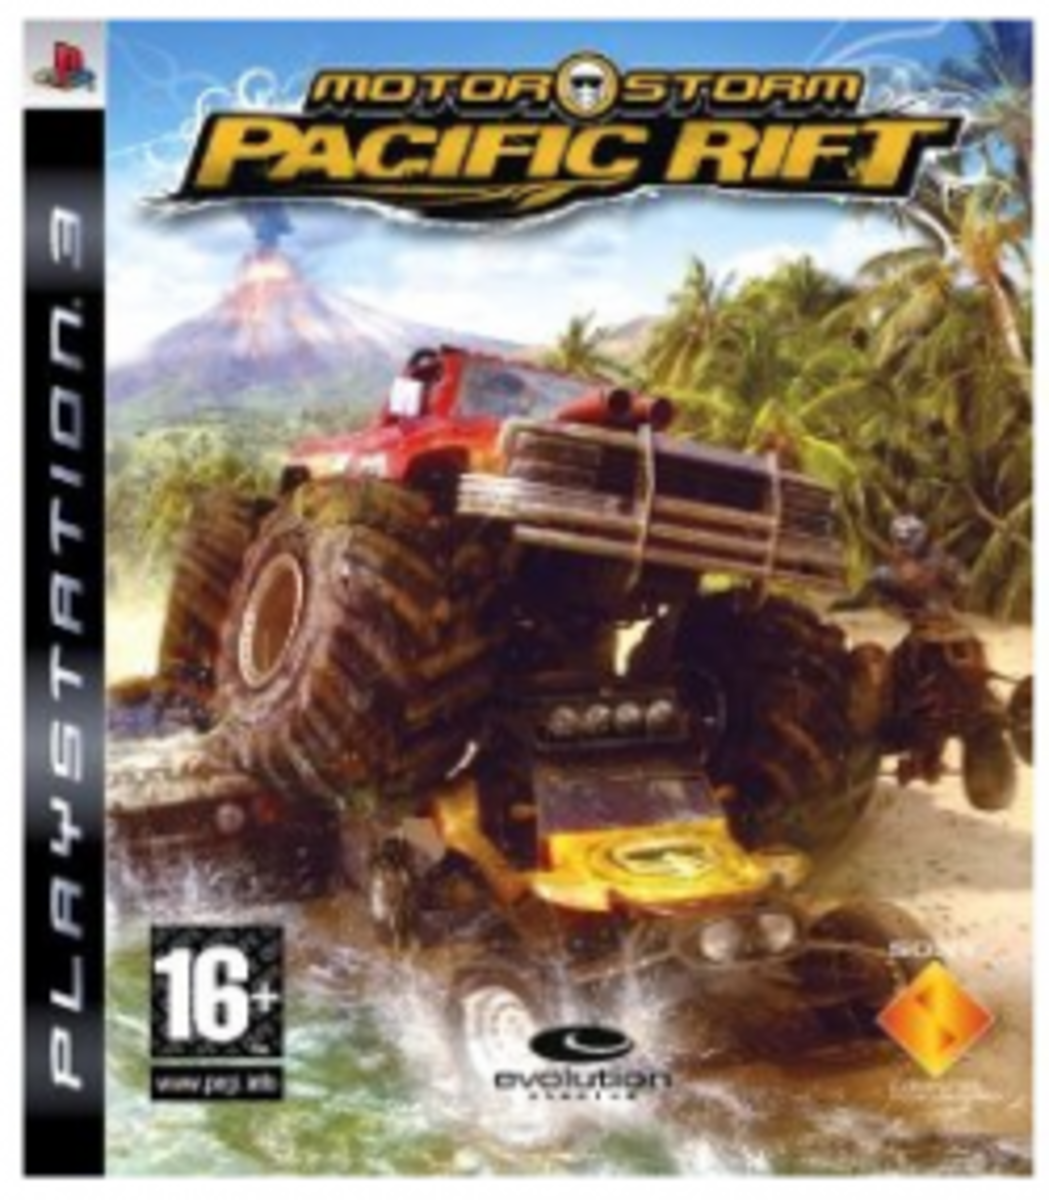 The Best PS3 2 Player Games for Parents and Children - HubPages